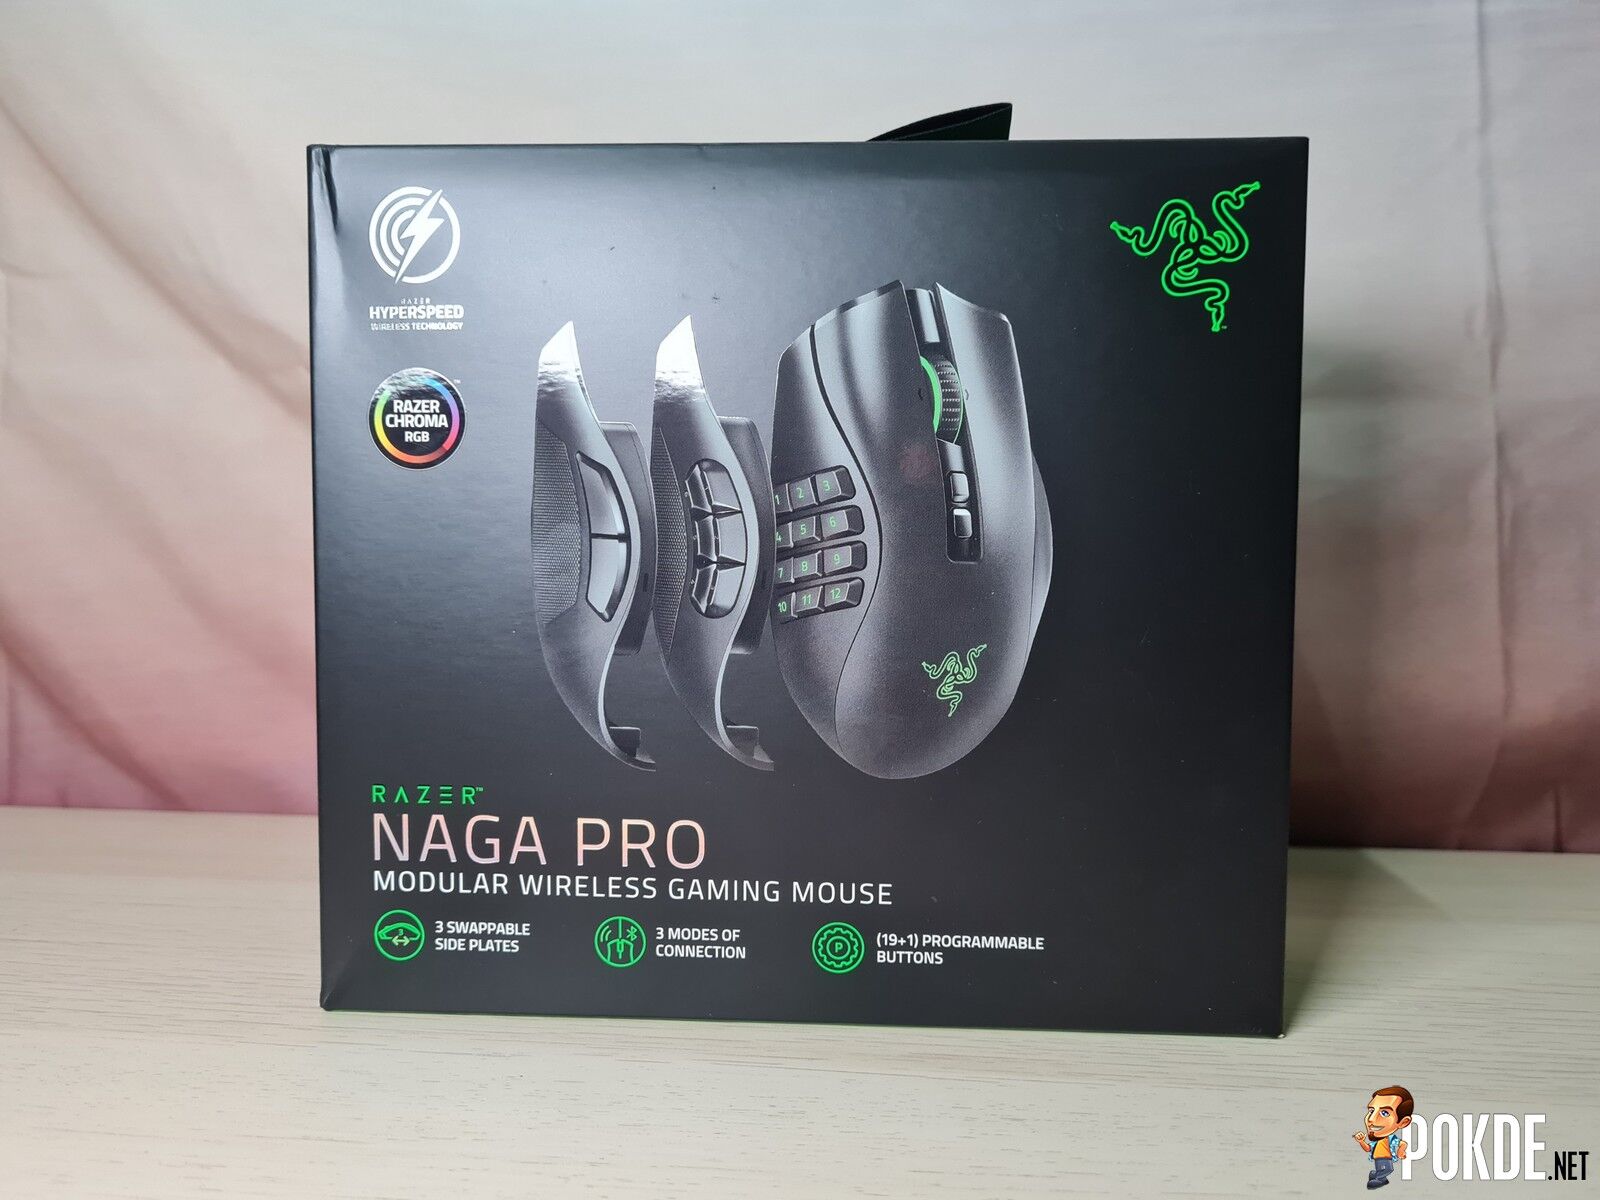  Buy Razer Naga Pro Modular Bluetooth Wireless RGB Gaming Mouse  with 3 Swappable Side Plates, Up to 19+1 Programmable Buttons